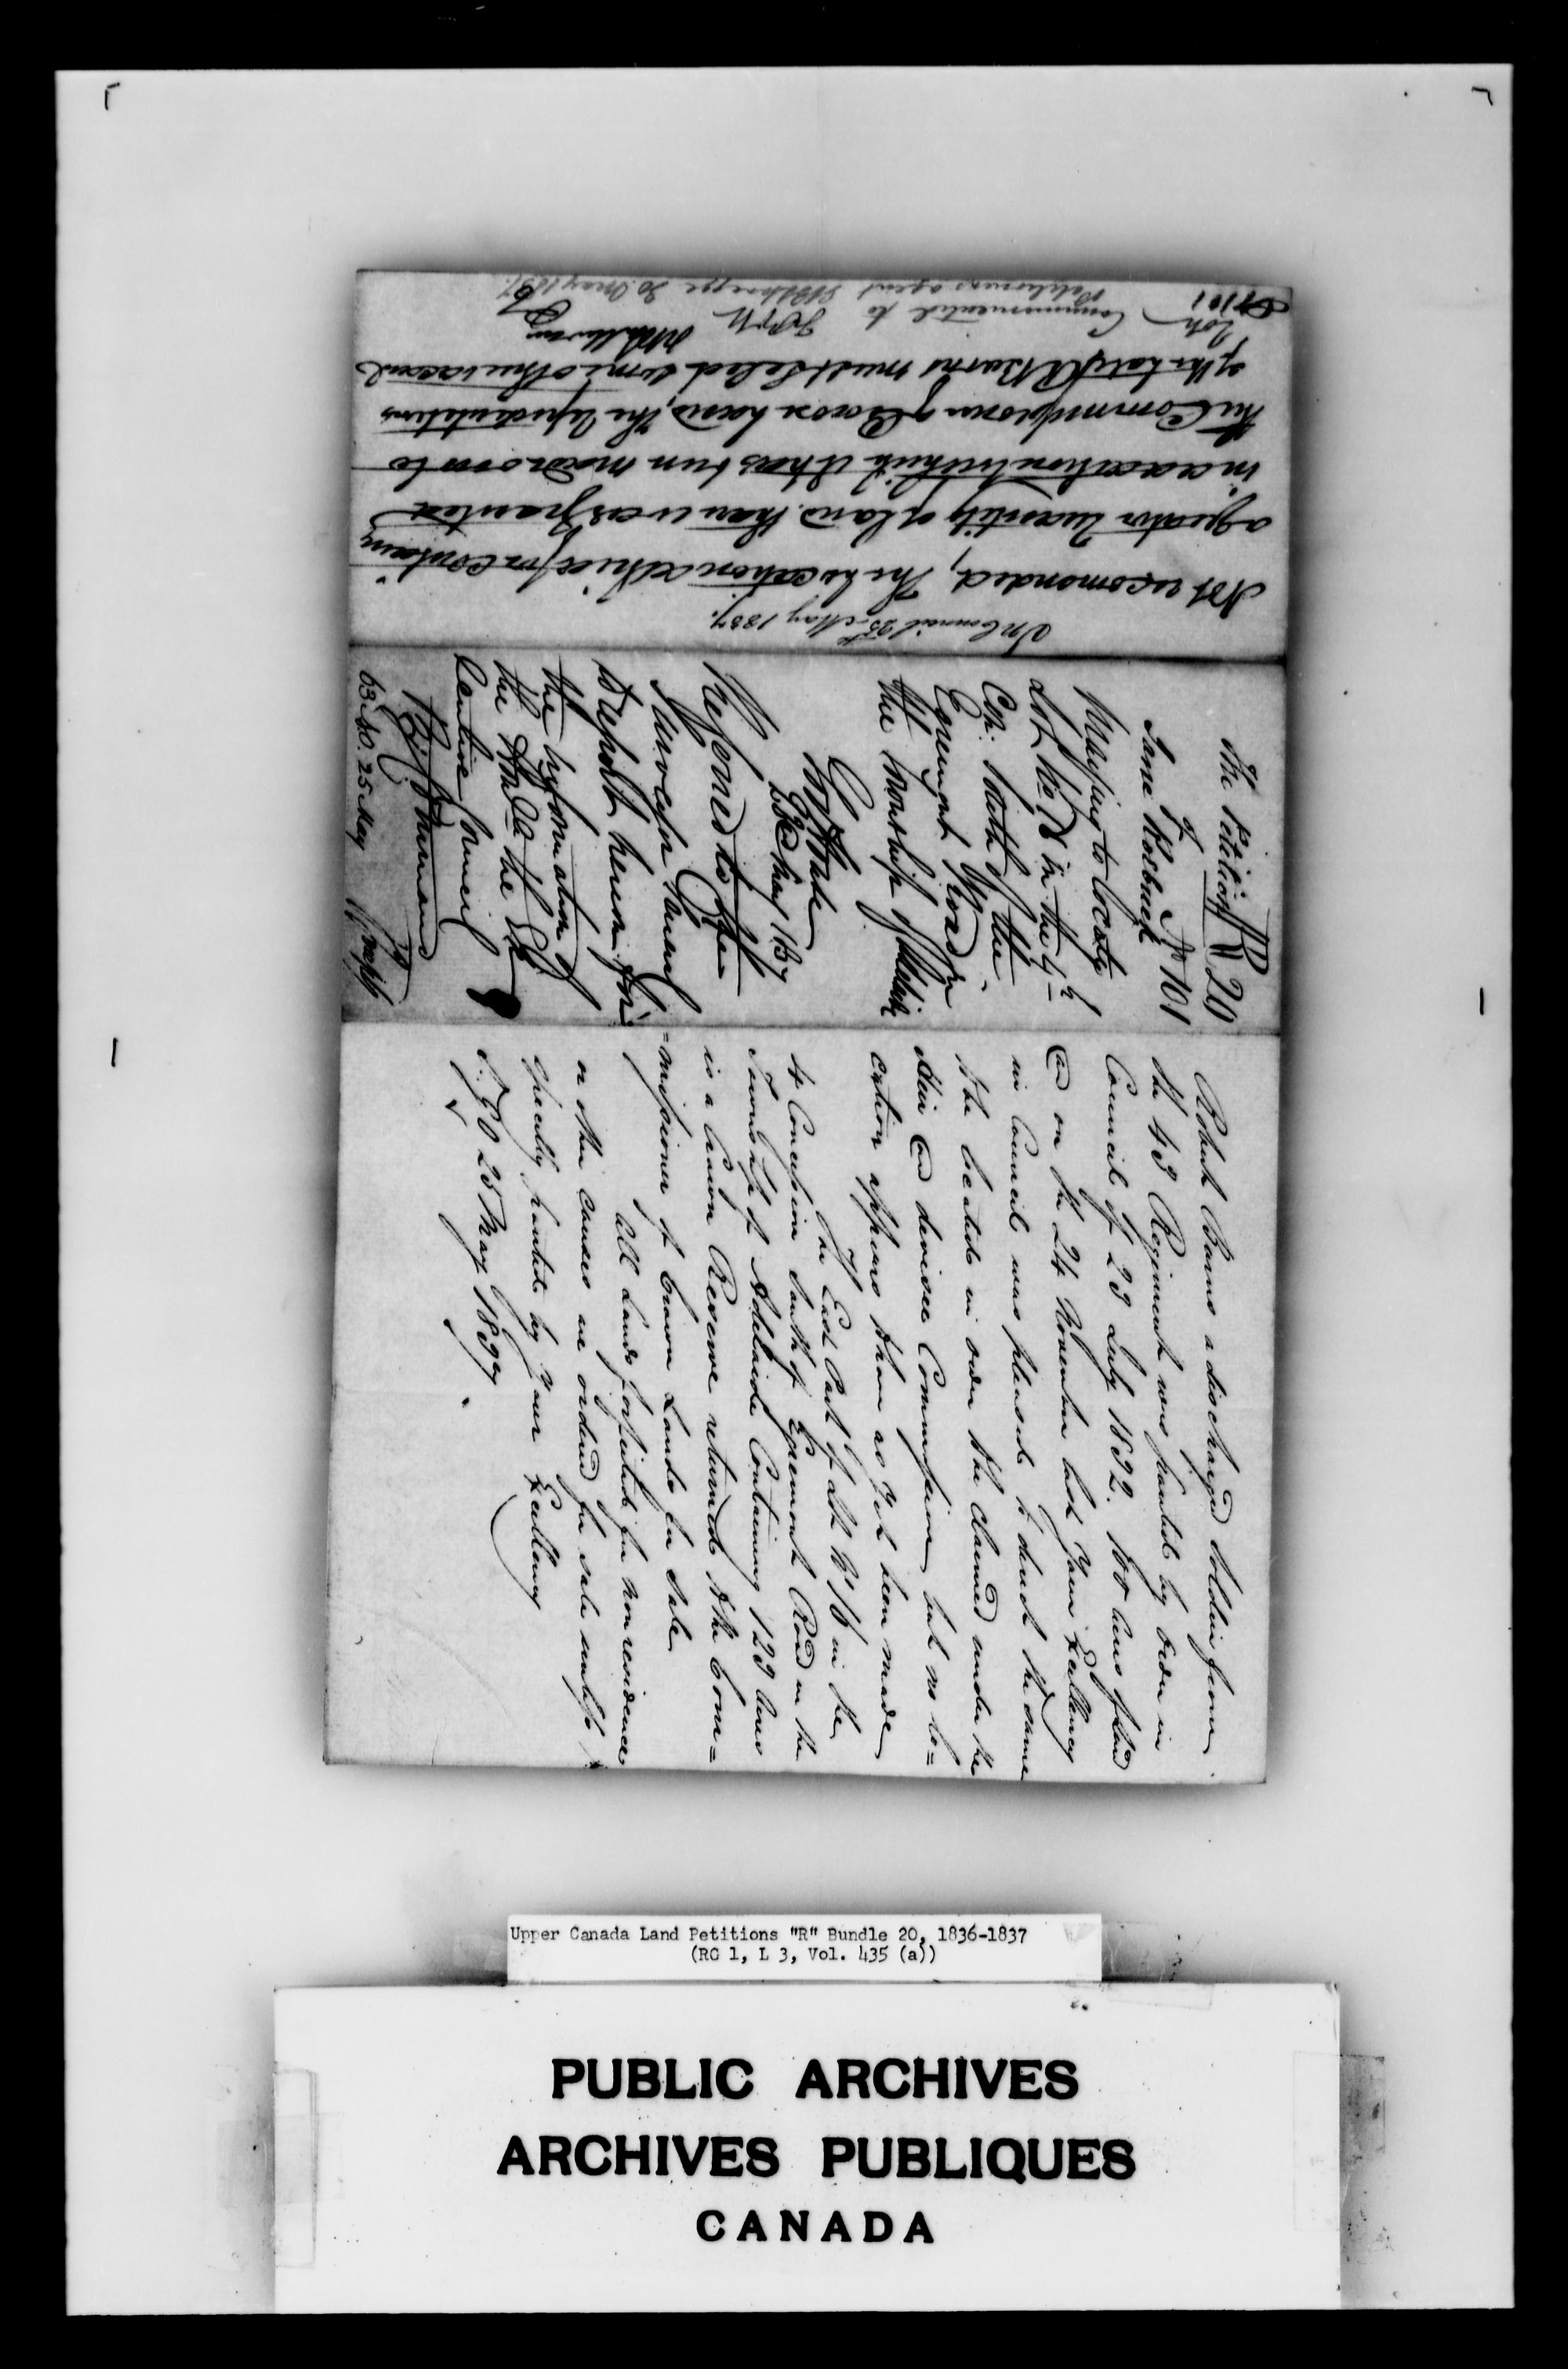 Title: Upper Canada Land Petitions (1763-1865) - Mikan Number: 205131 - Microform: c-2747